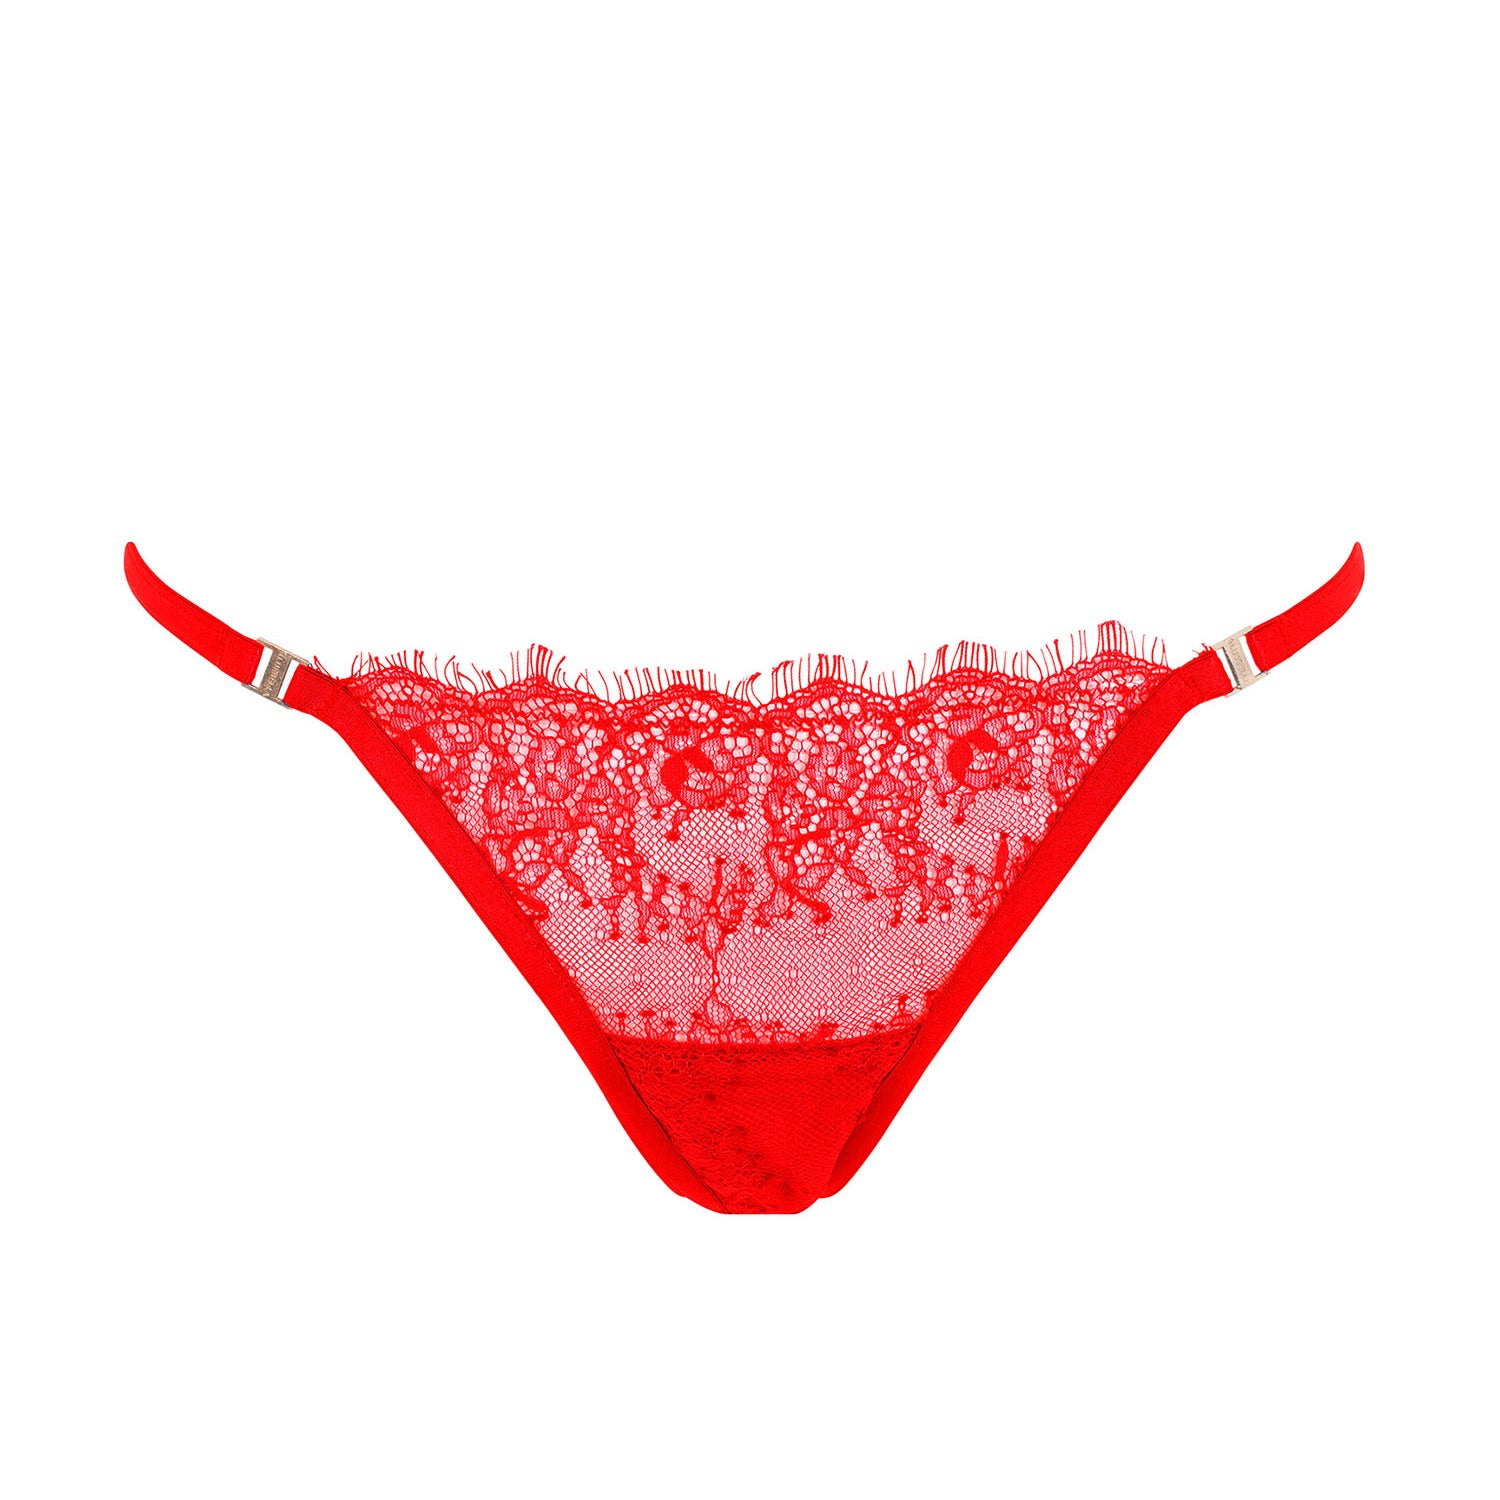 Bluebella Grace Thong (Tomato Red) - Red Lace G-String | Avec Amour Sexy Lingerie